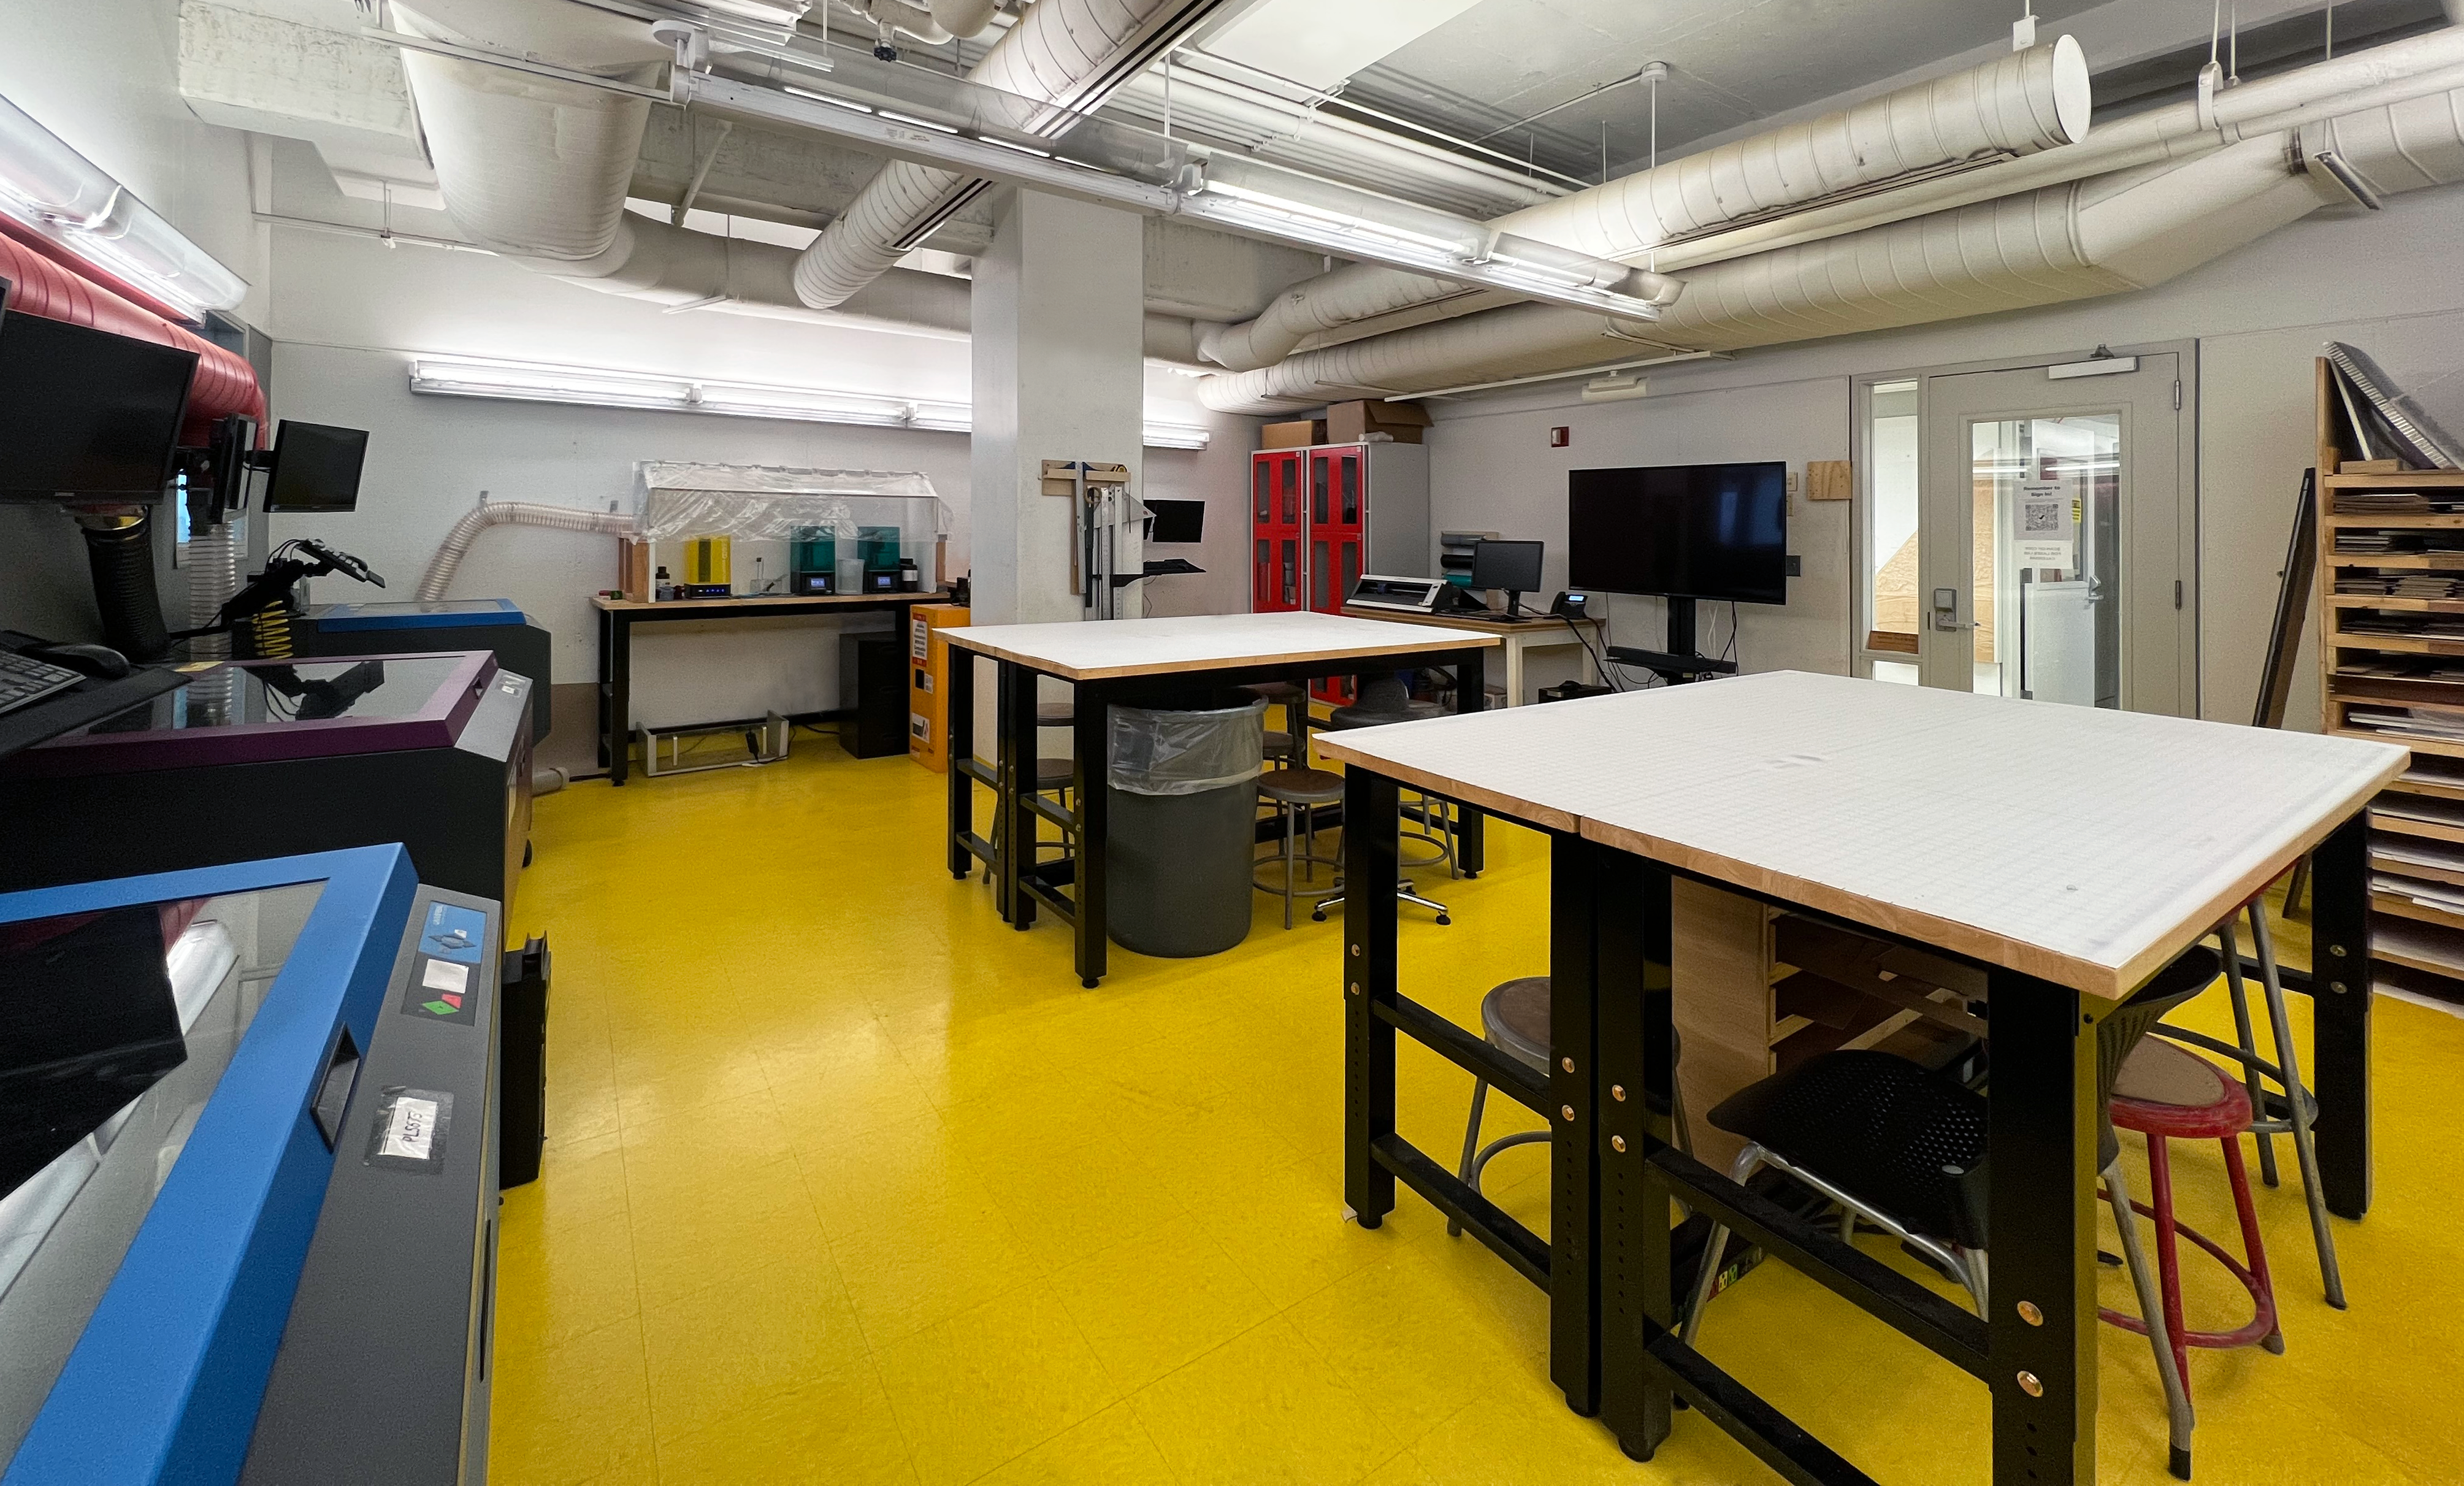 Photo of Laser Lab at HCAD including Laser Cutters, 3D Printers, Vinyl Cutters and work tables.